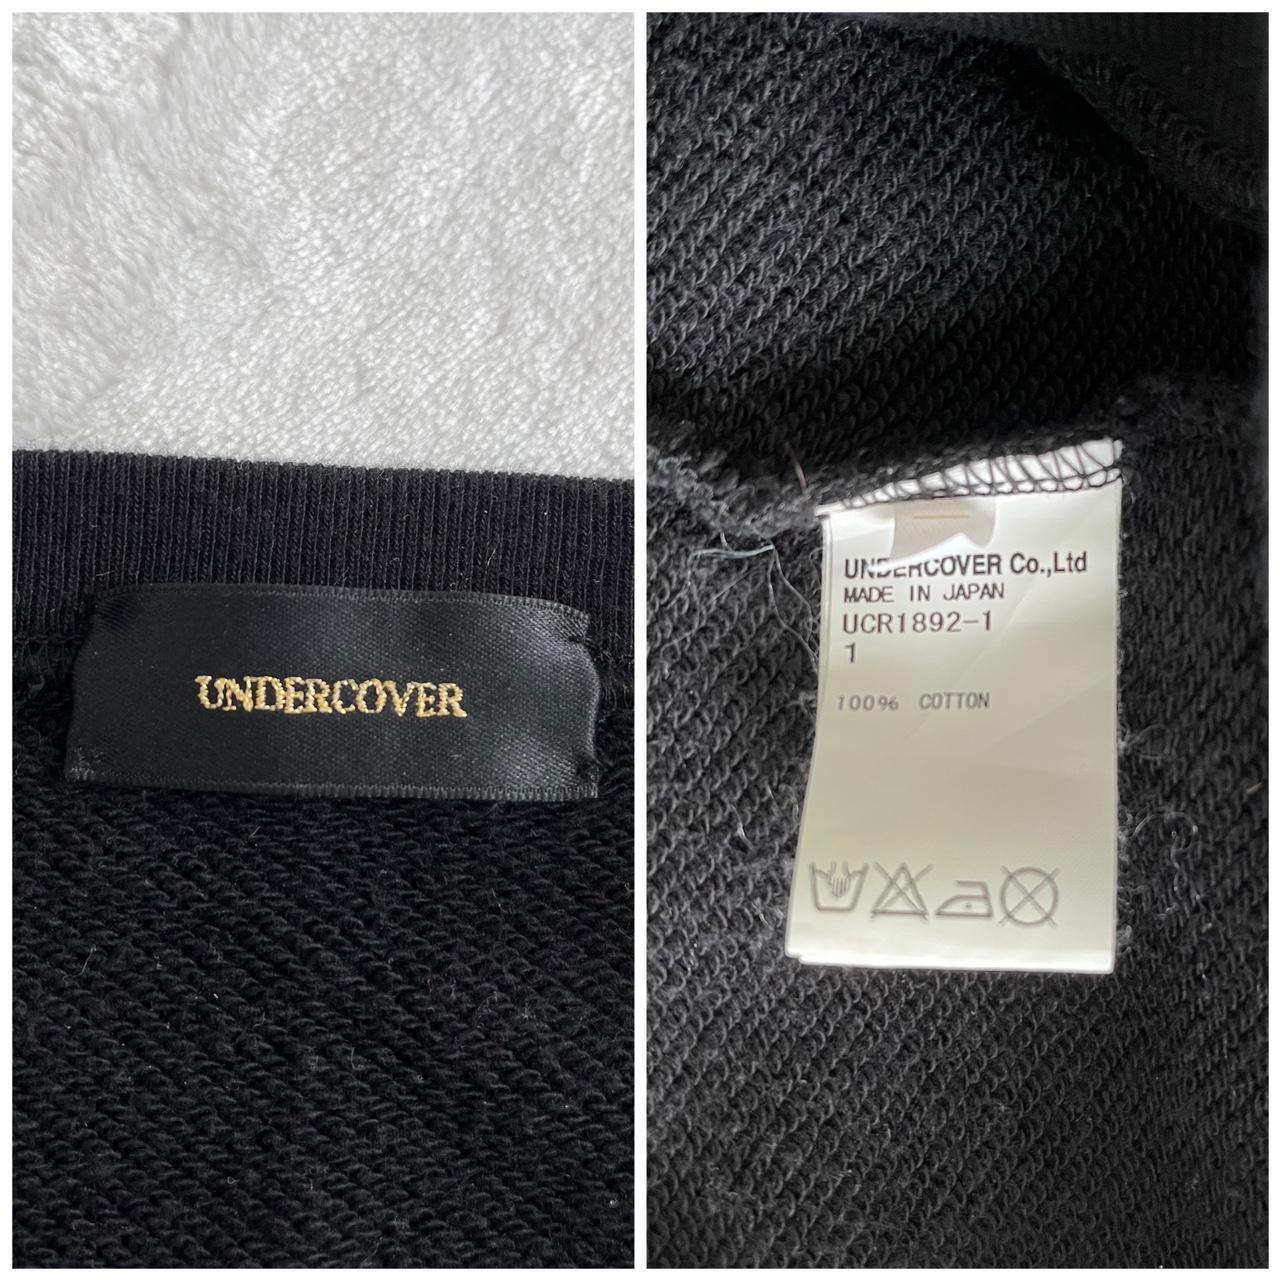 Product Image 4 - Undercover Jun Takahashi perfect day